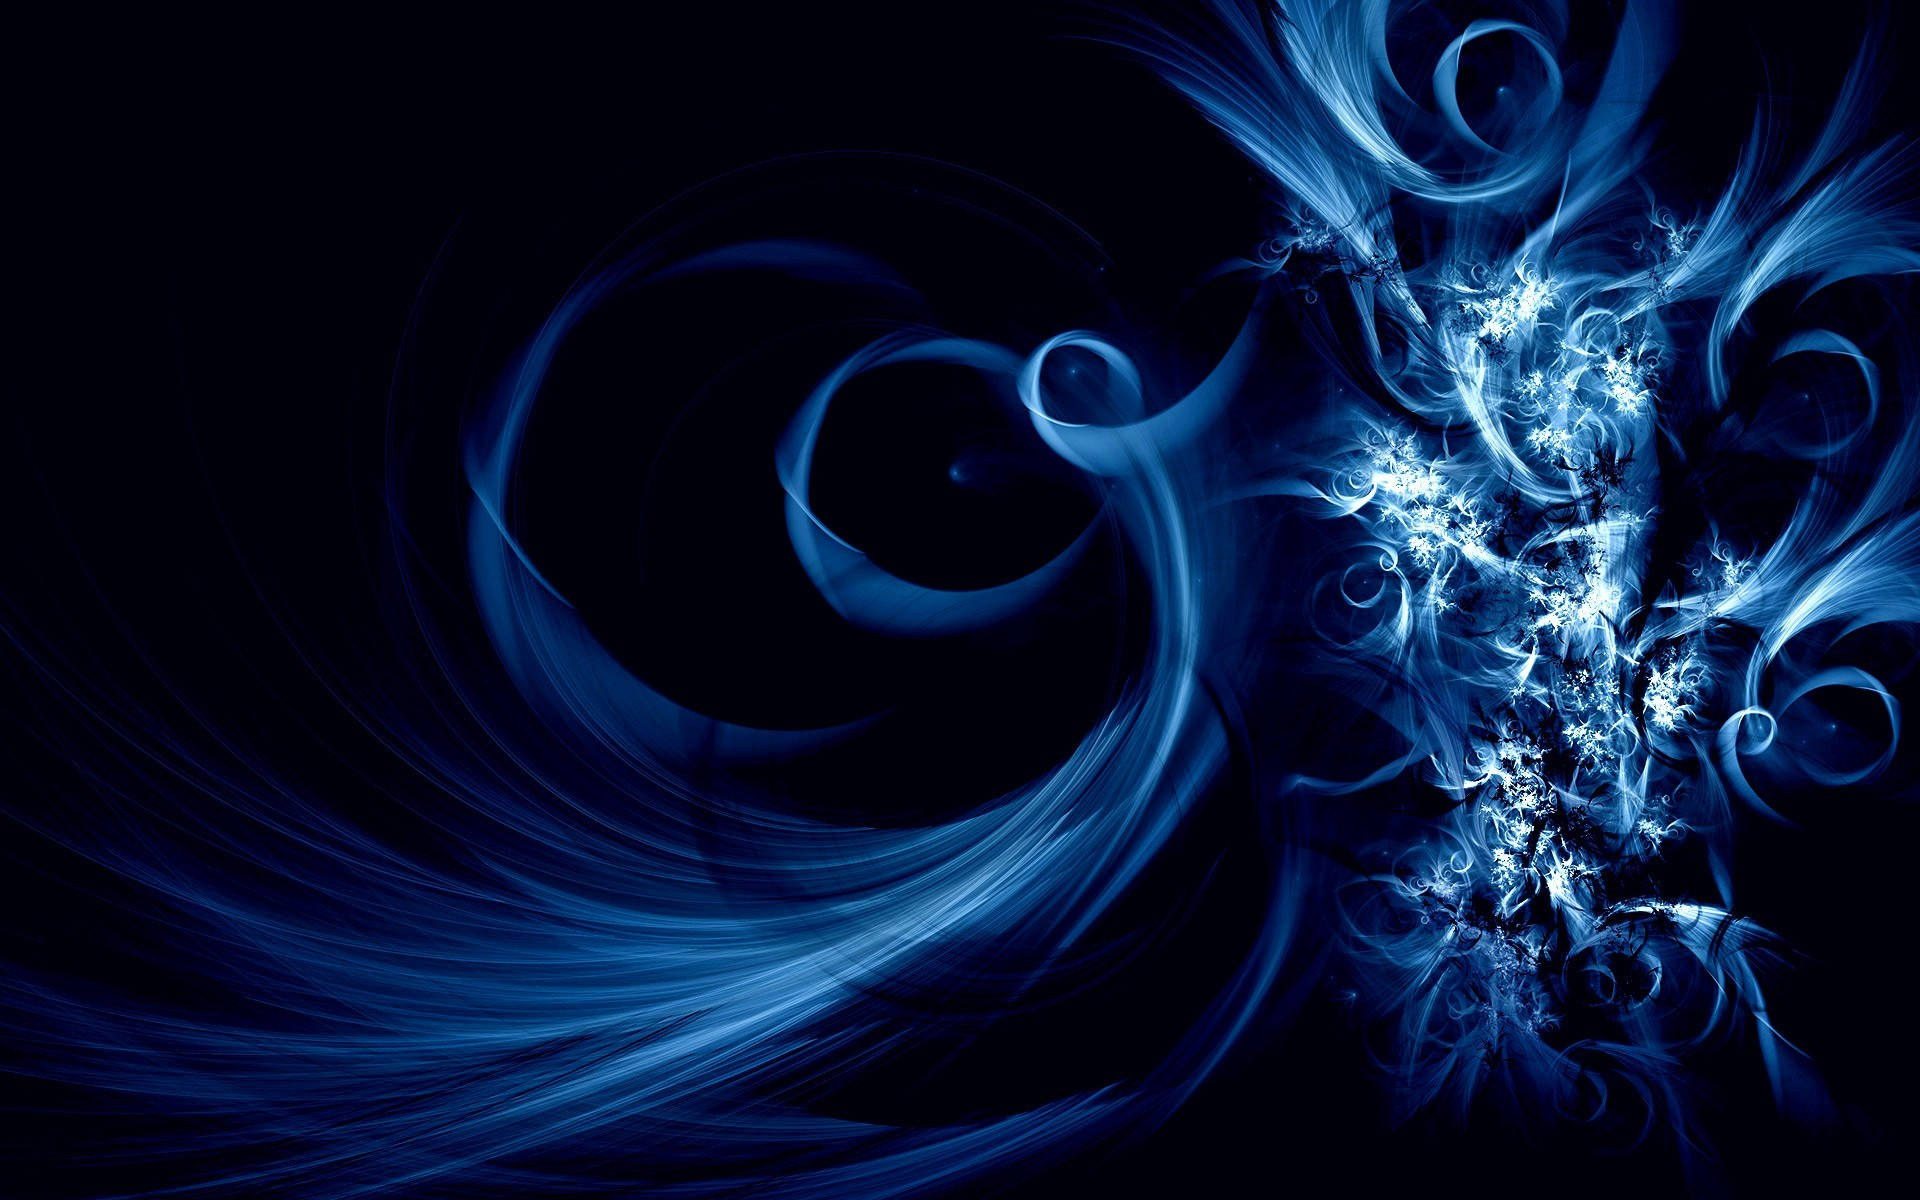 Black And Blue Smoke Abstract